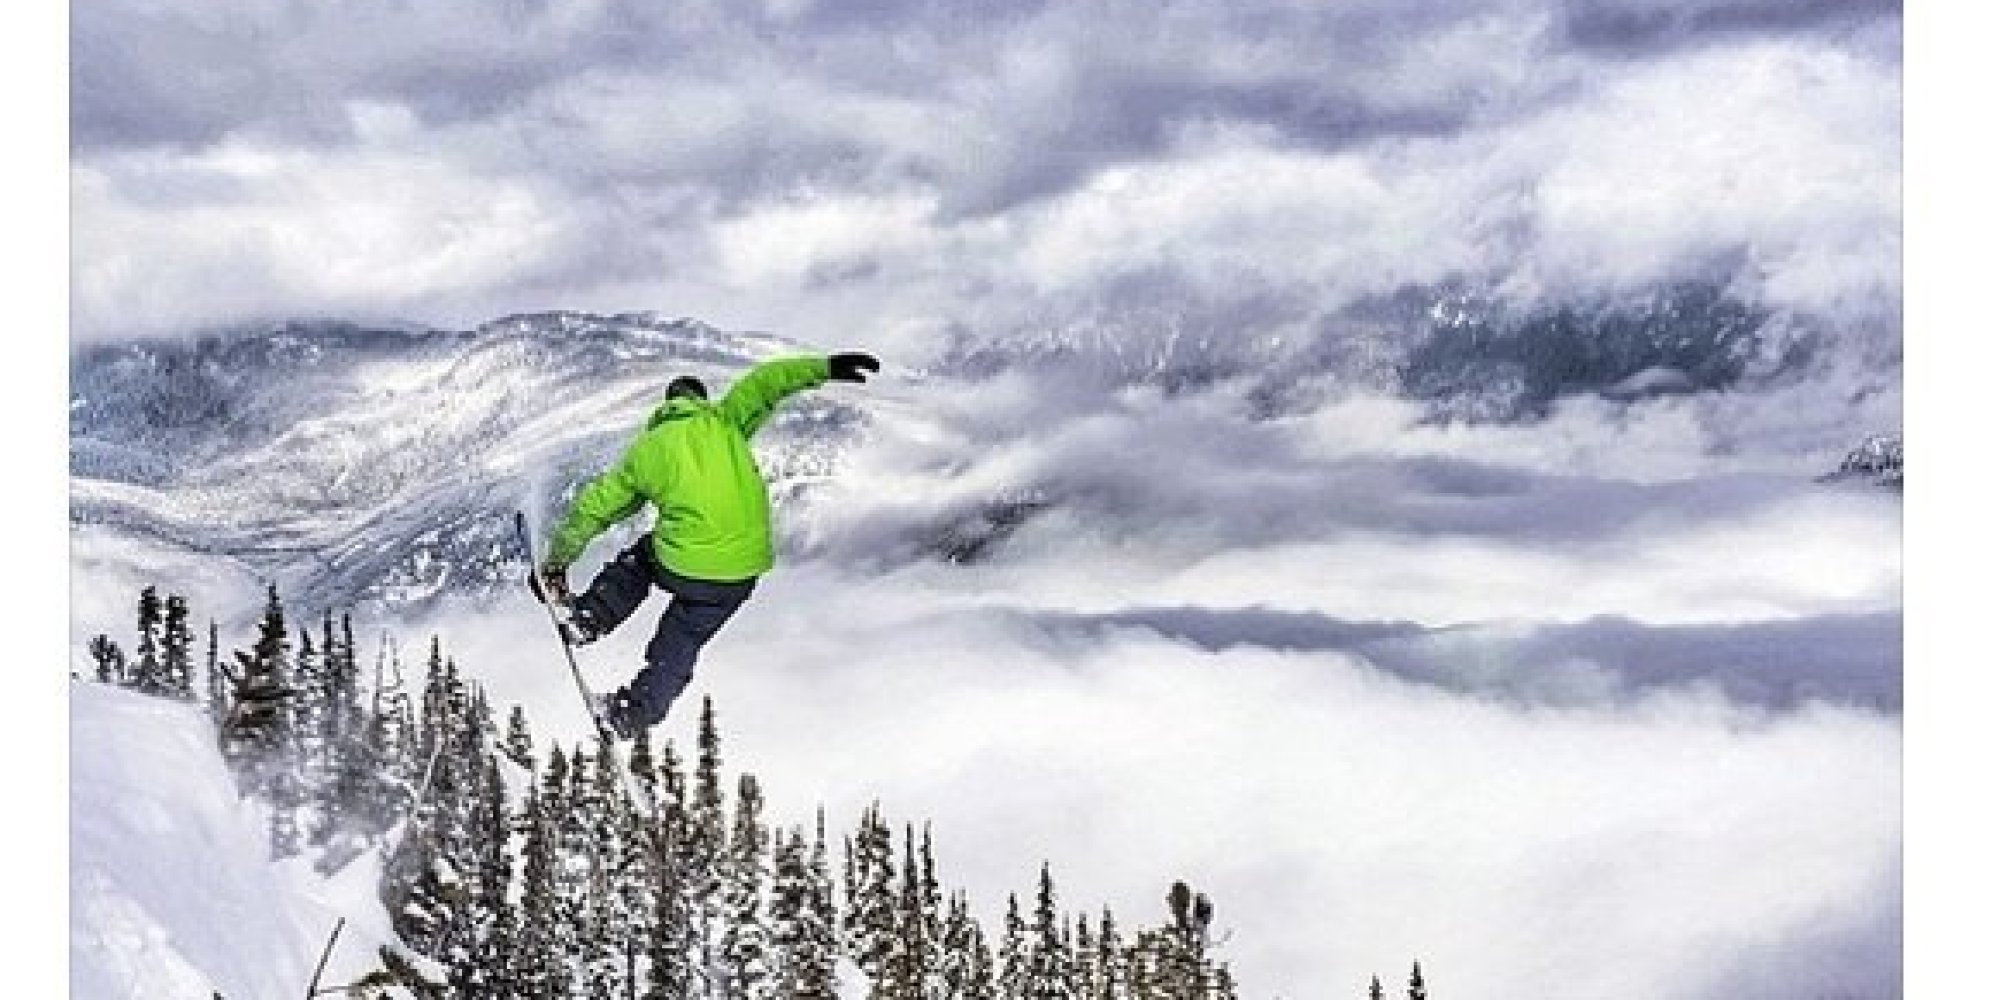 instagram snowboarding max snowboard gladwell instagrams huffpost